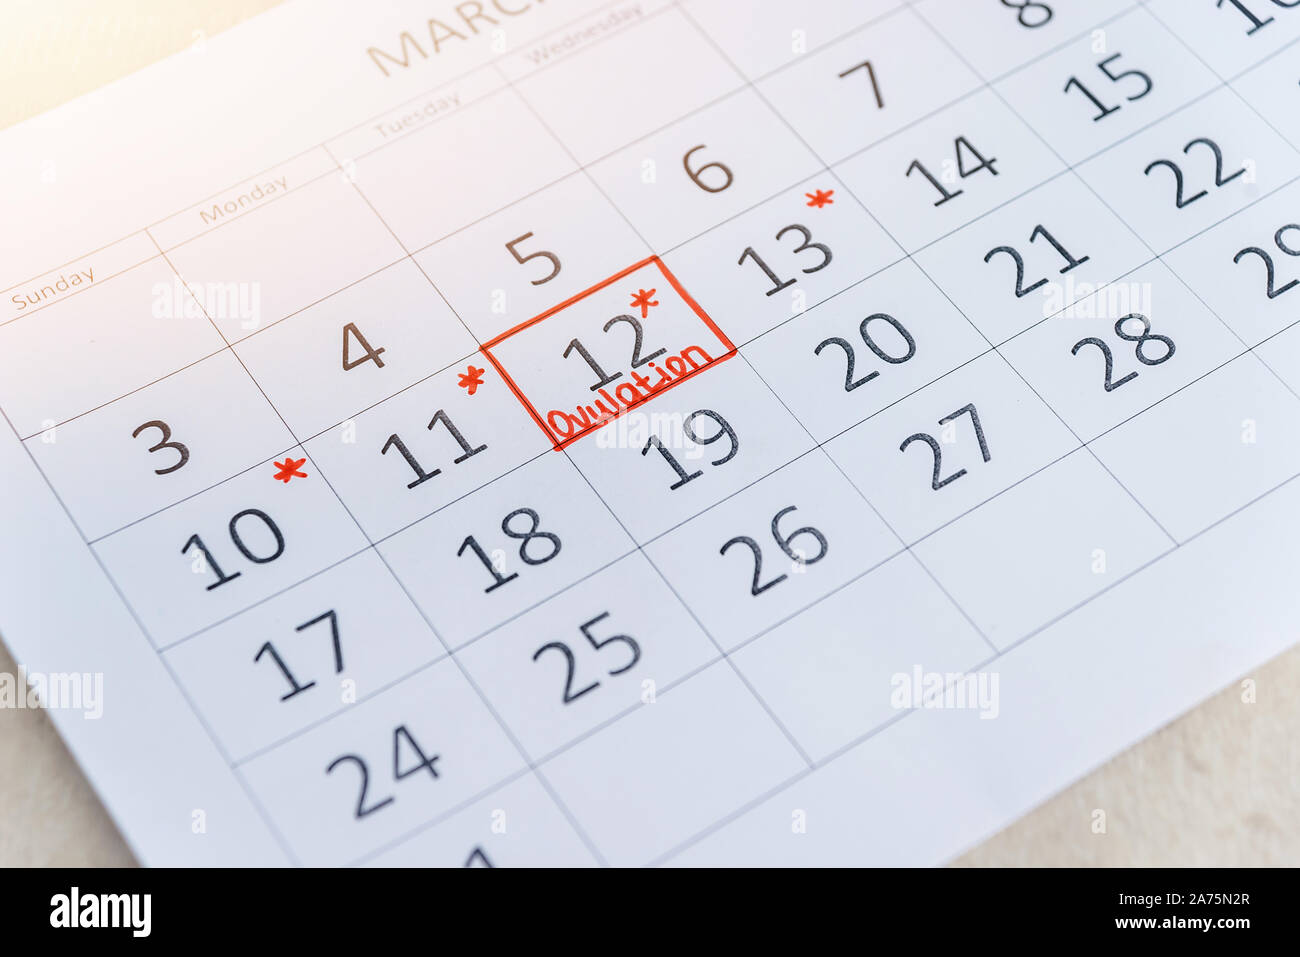 Circling date in calendar. Planning of pregnancy, trying to have baby. Stock Photo